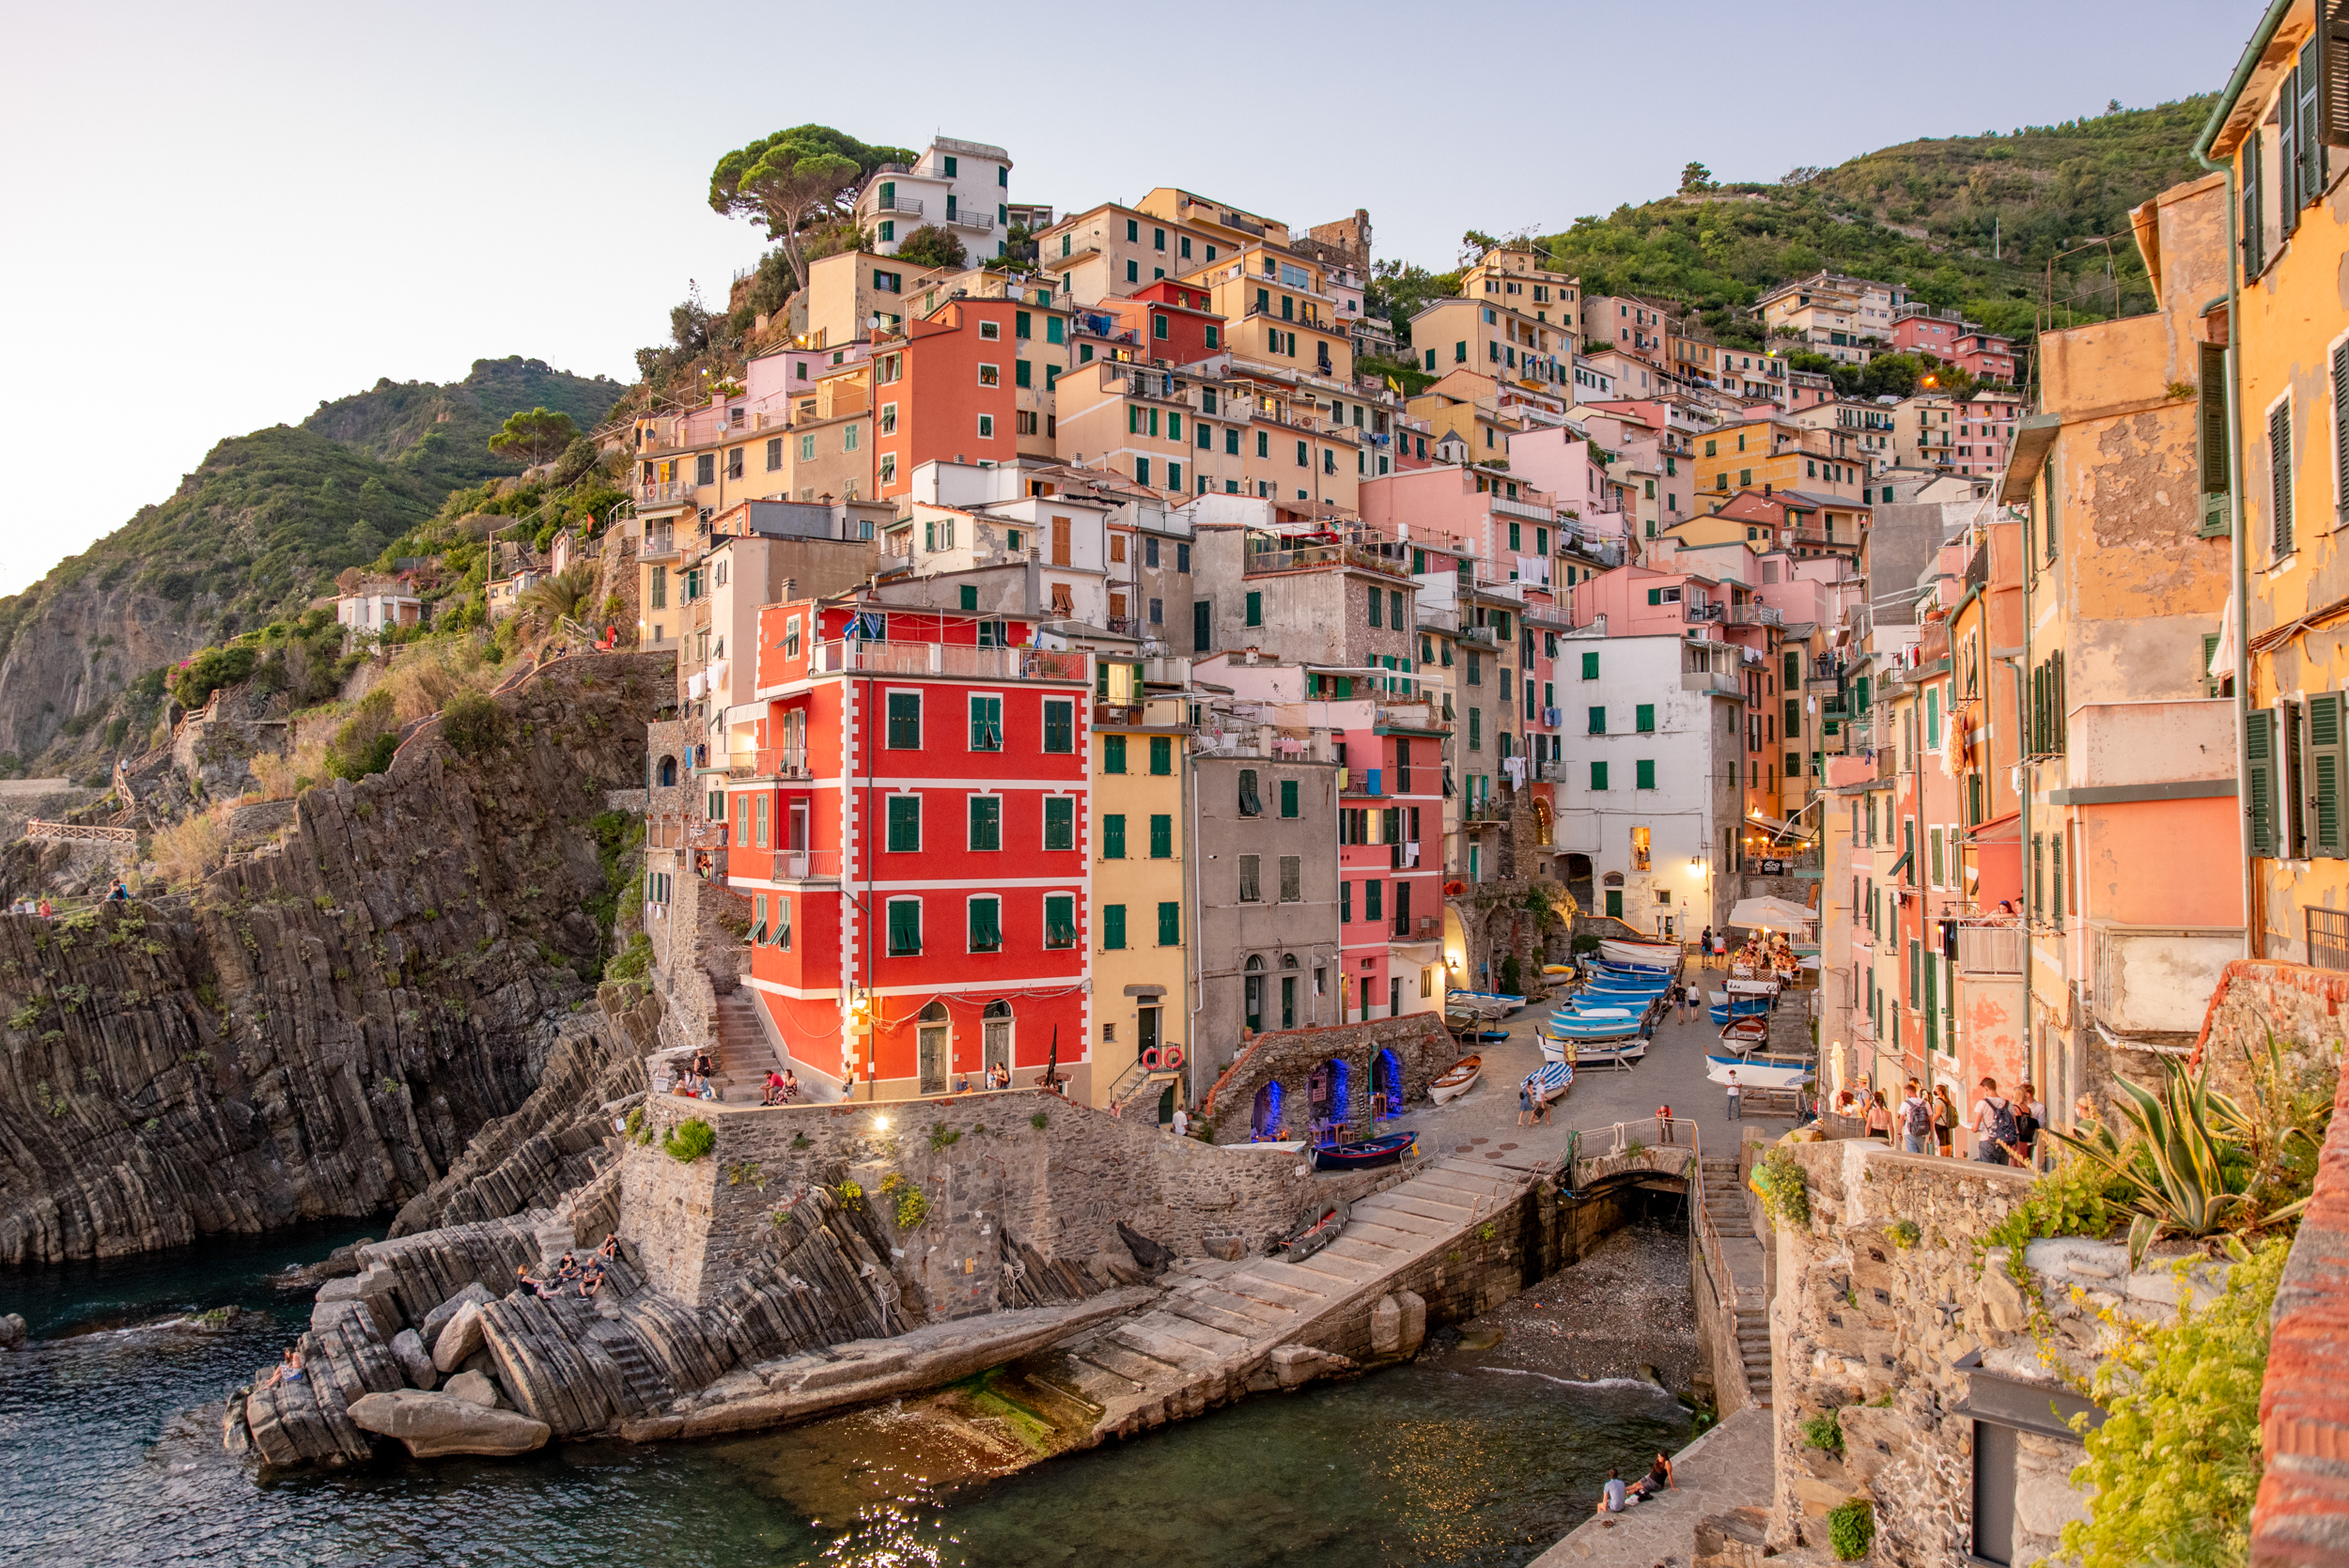 Towns of Cinque Terre Italy